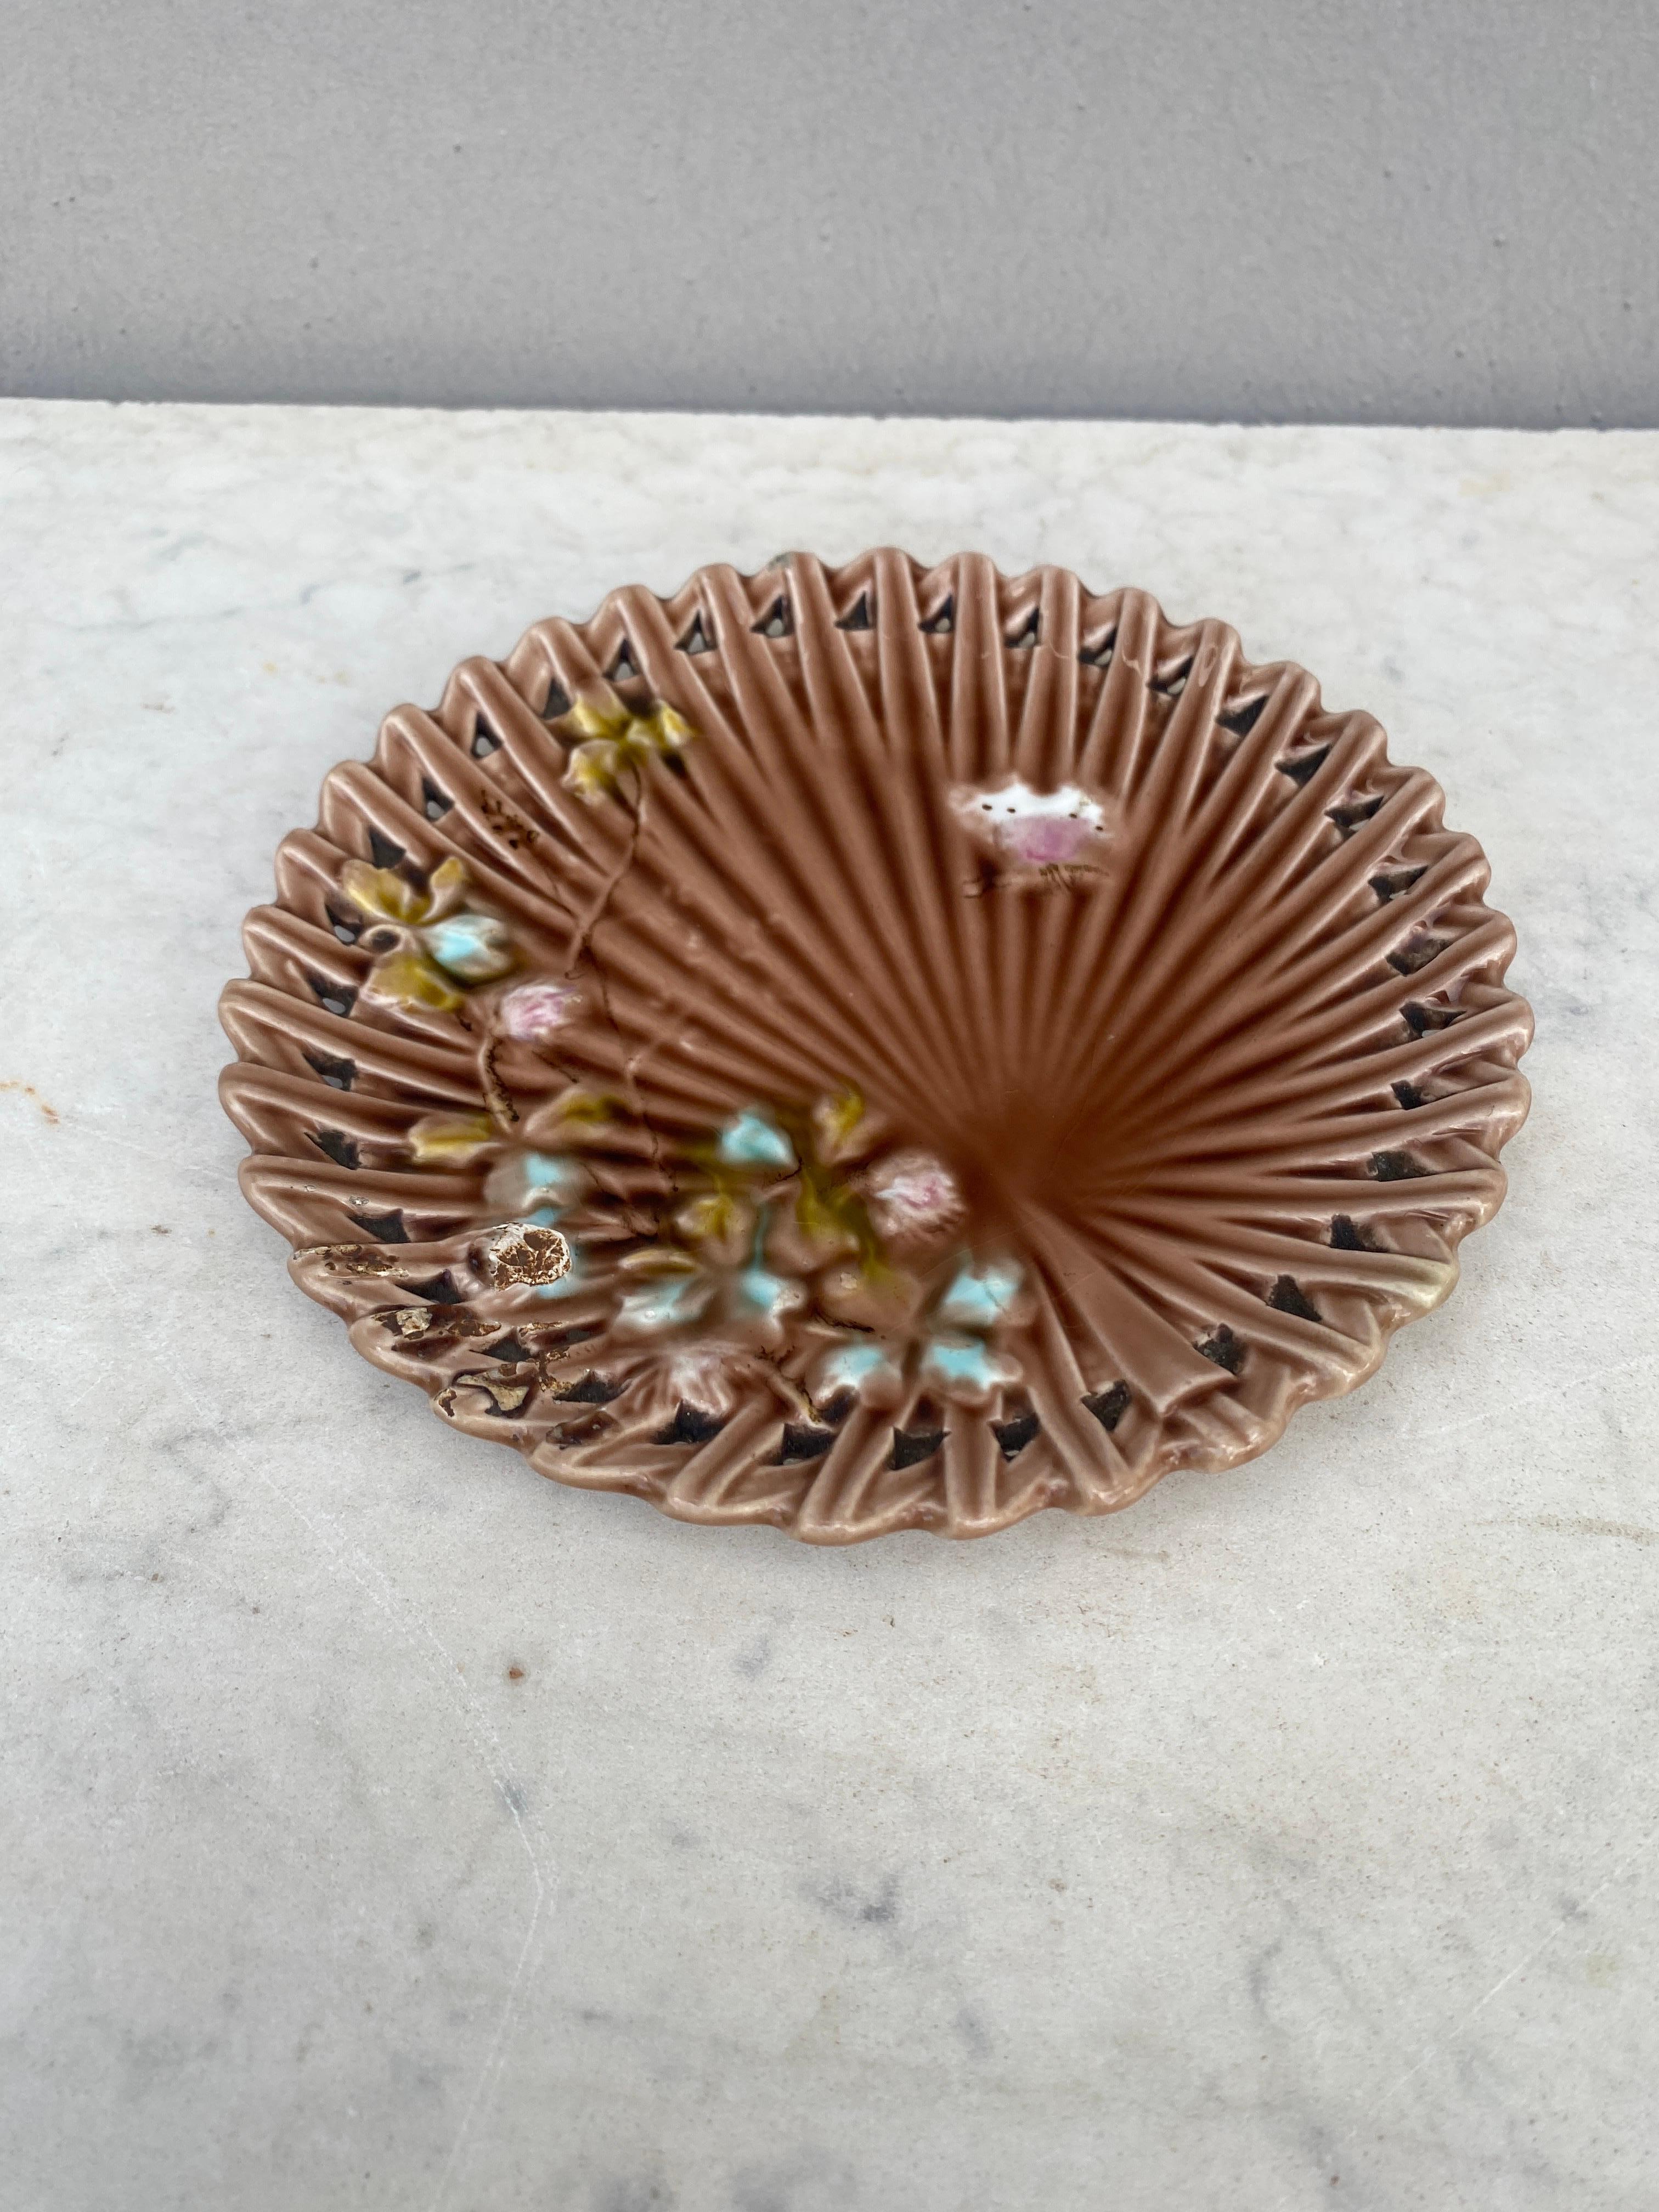 Small German Majolica Flowers Plate Villeroy & Boch circa 1900 In Good Condition For Sale In Austin, TX